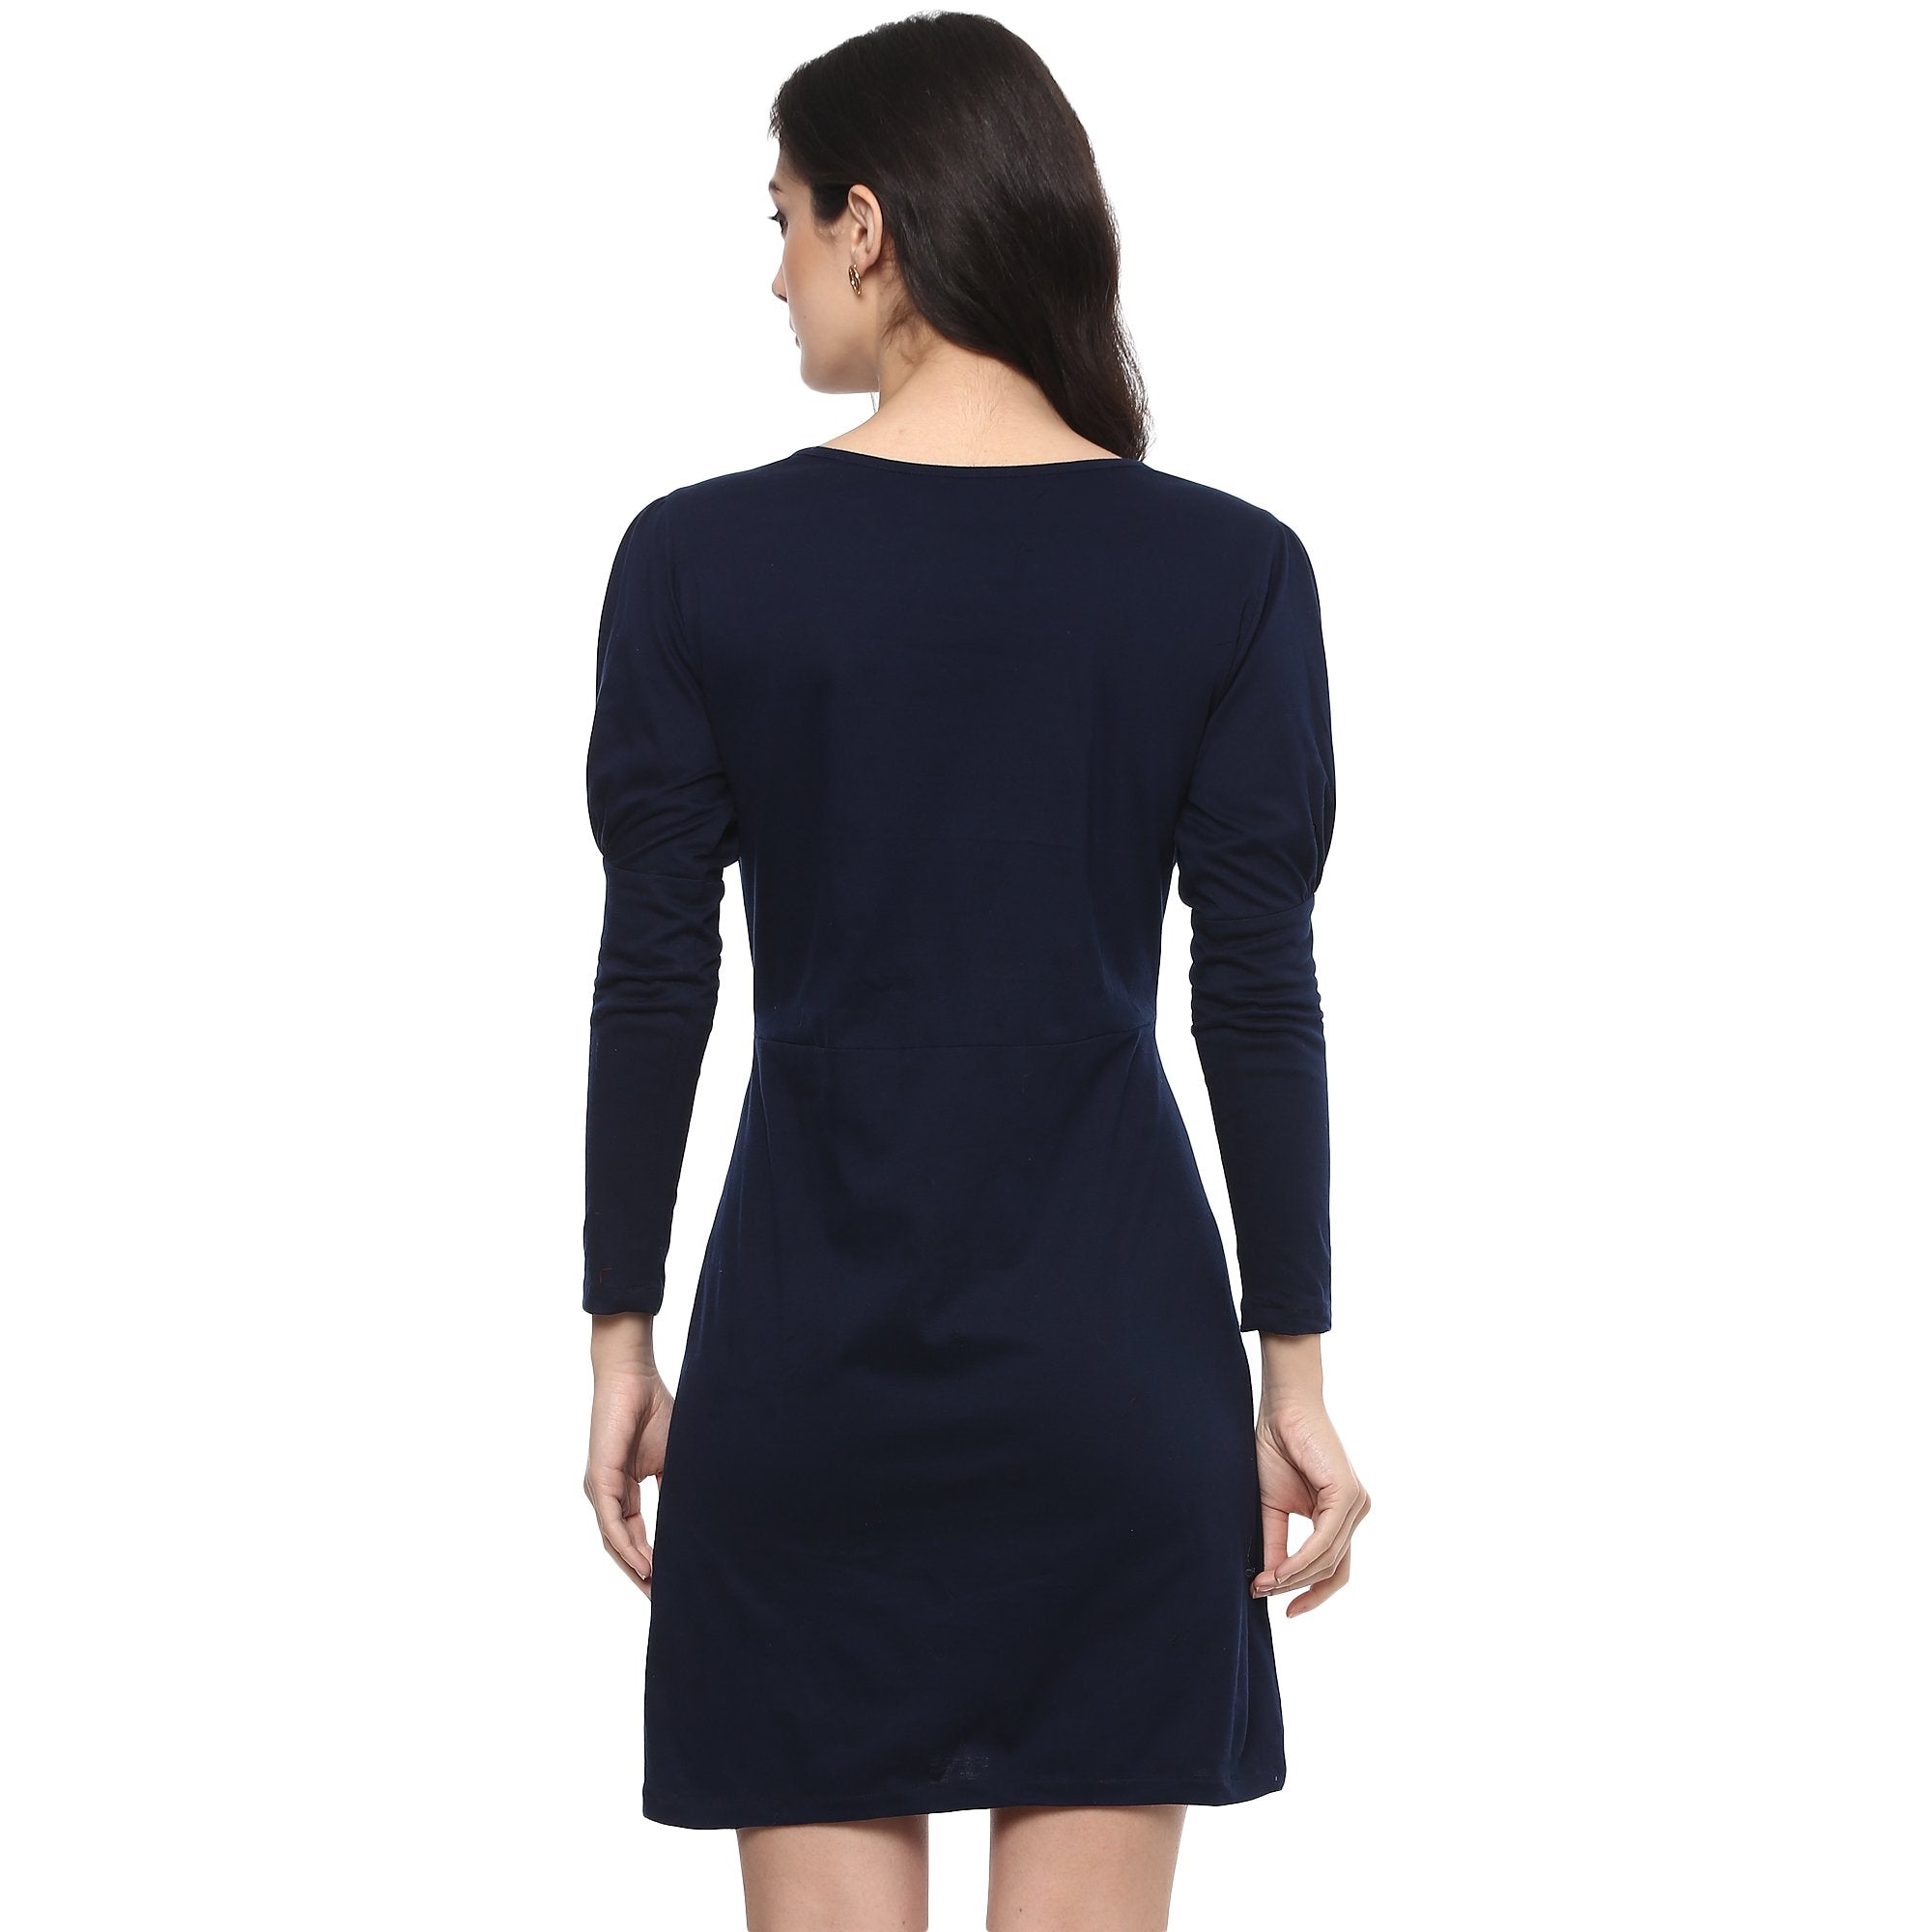 Women's Knitted Dress With Corset - Pannkh